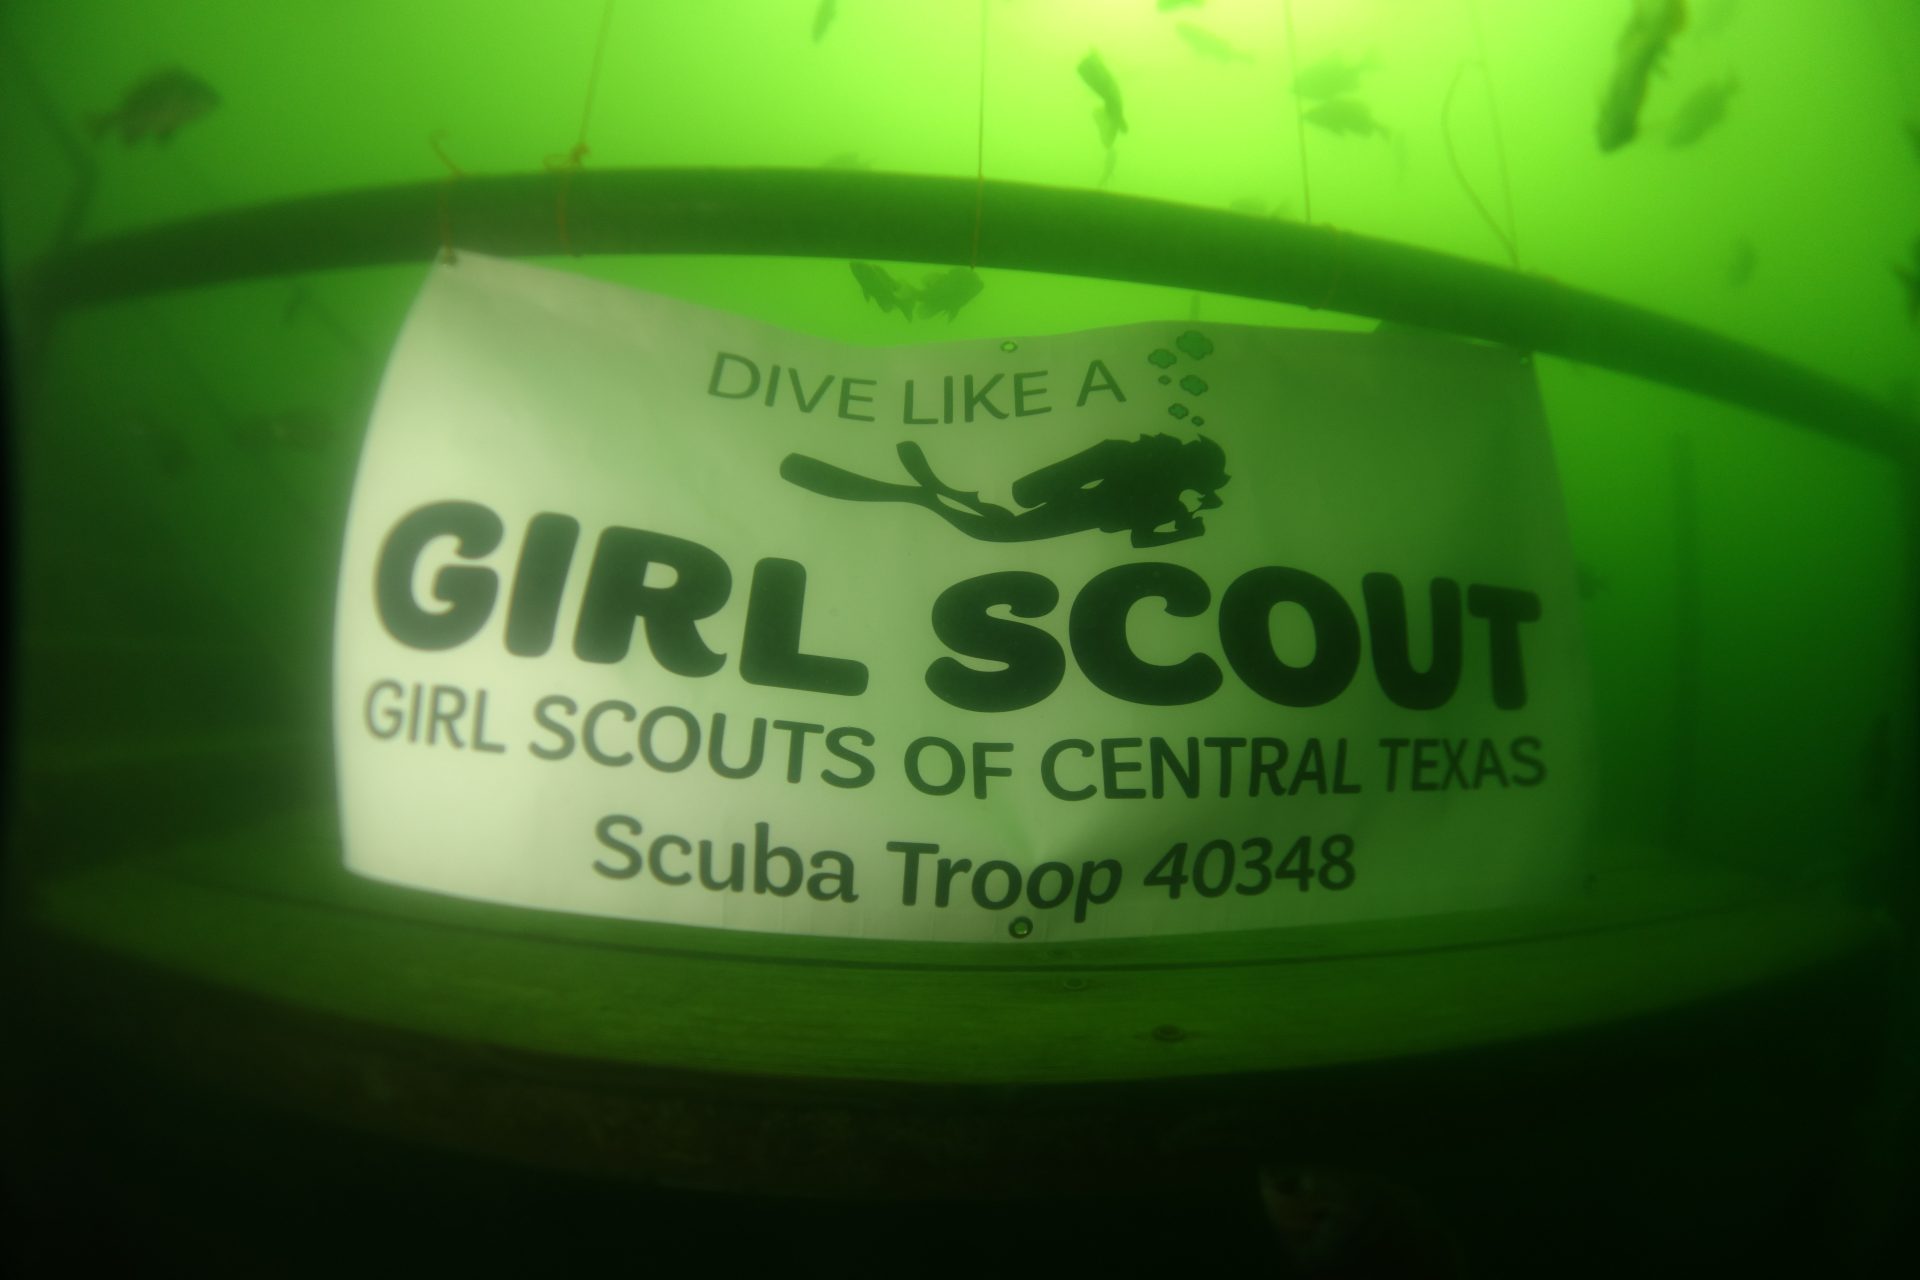 The group's "DIVE LIKE A GIRL SCOUT" banner hangs underwater for a troop event. 